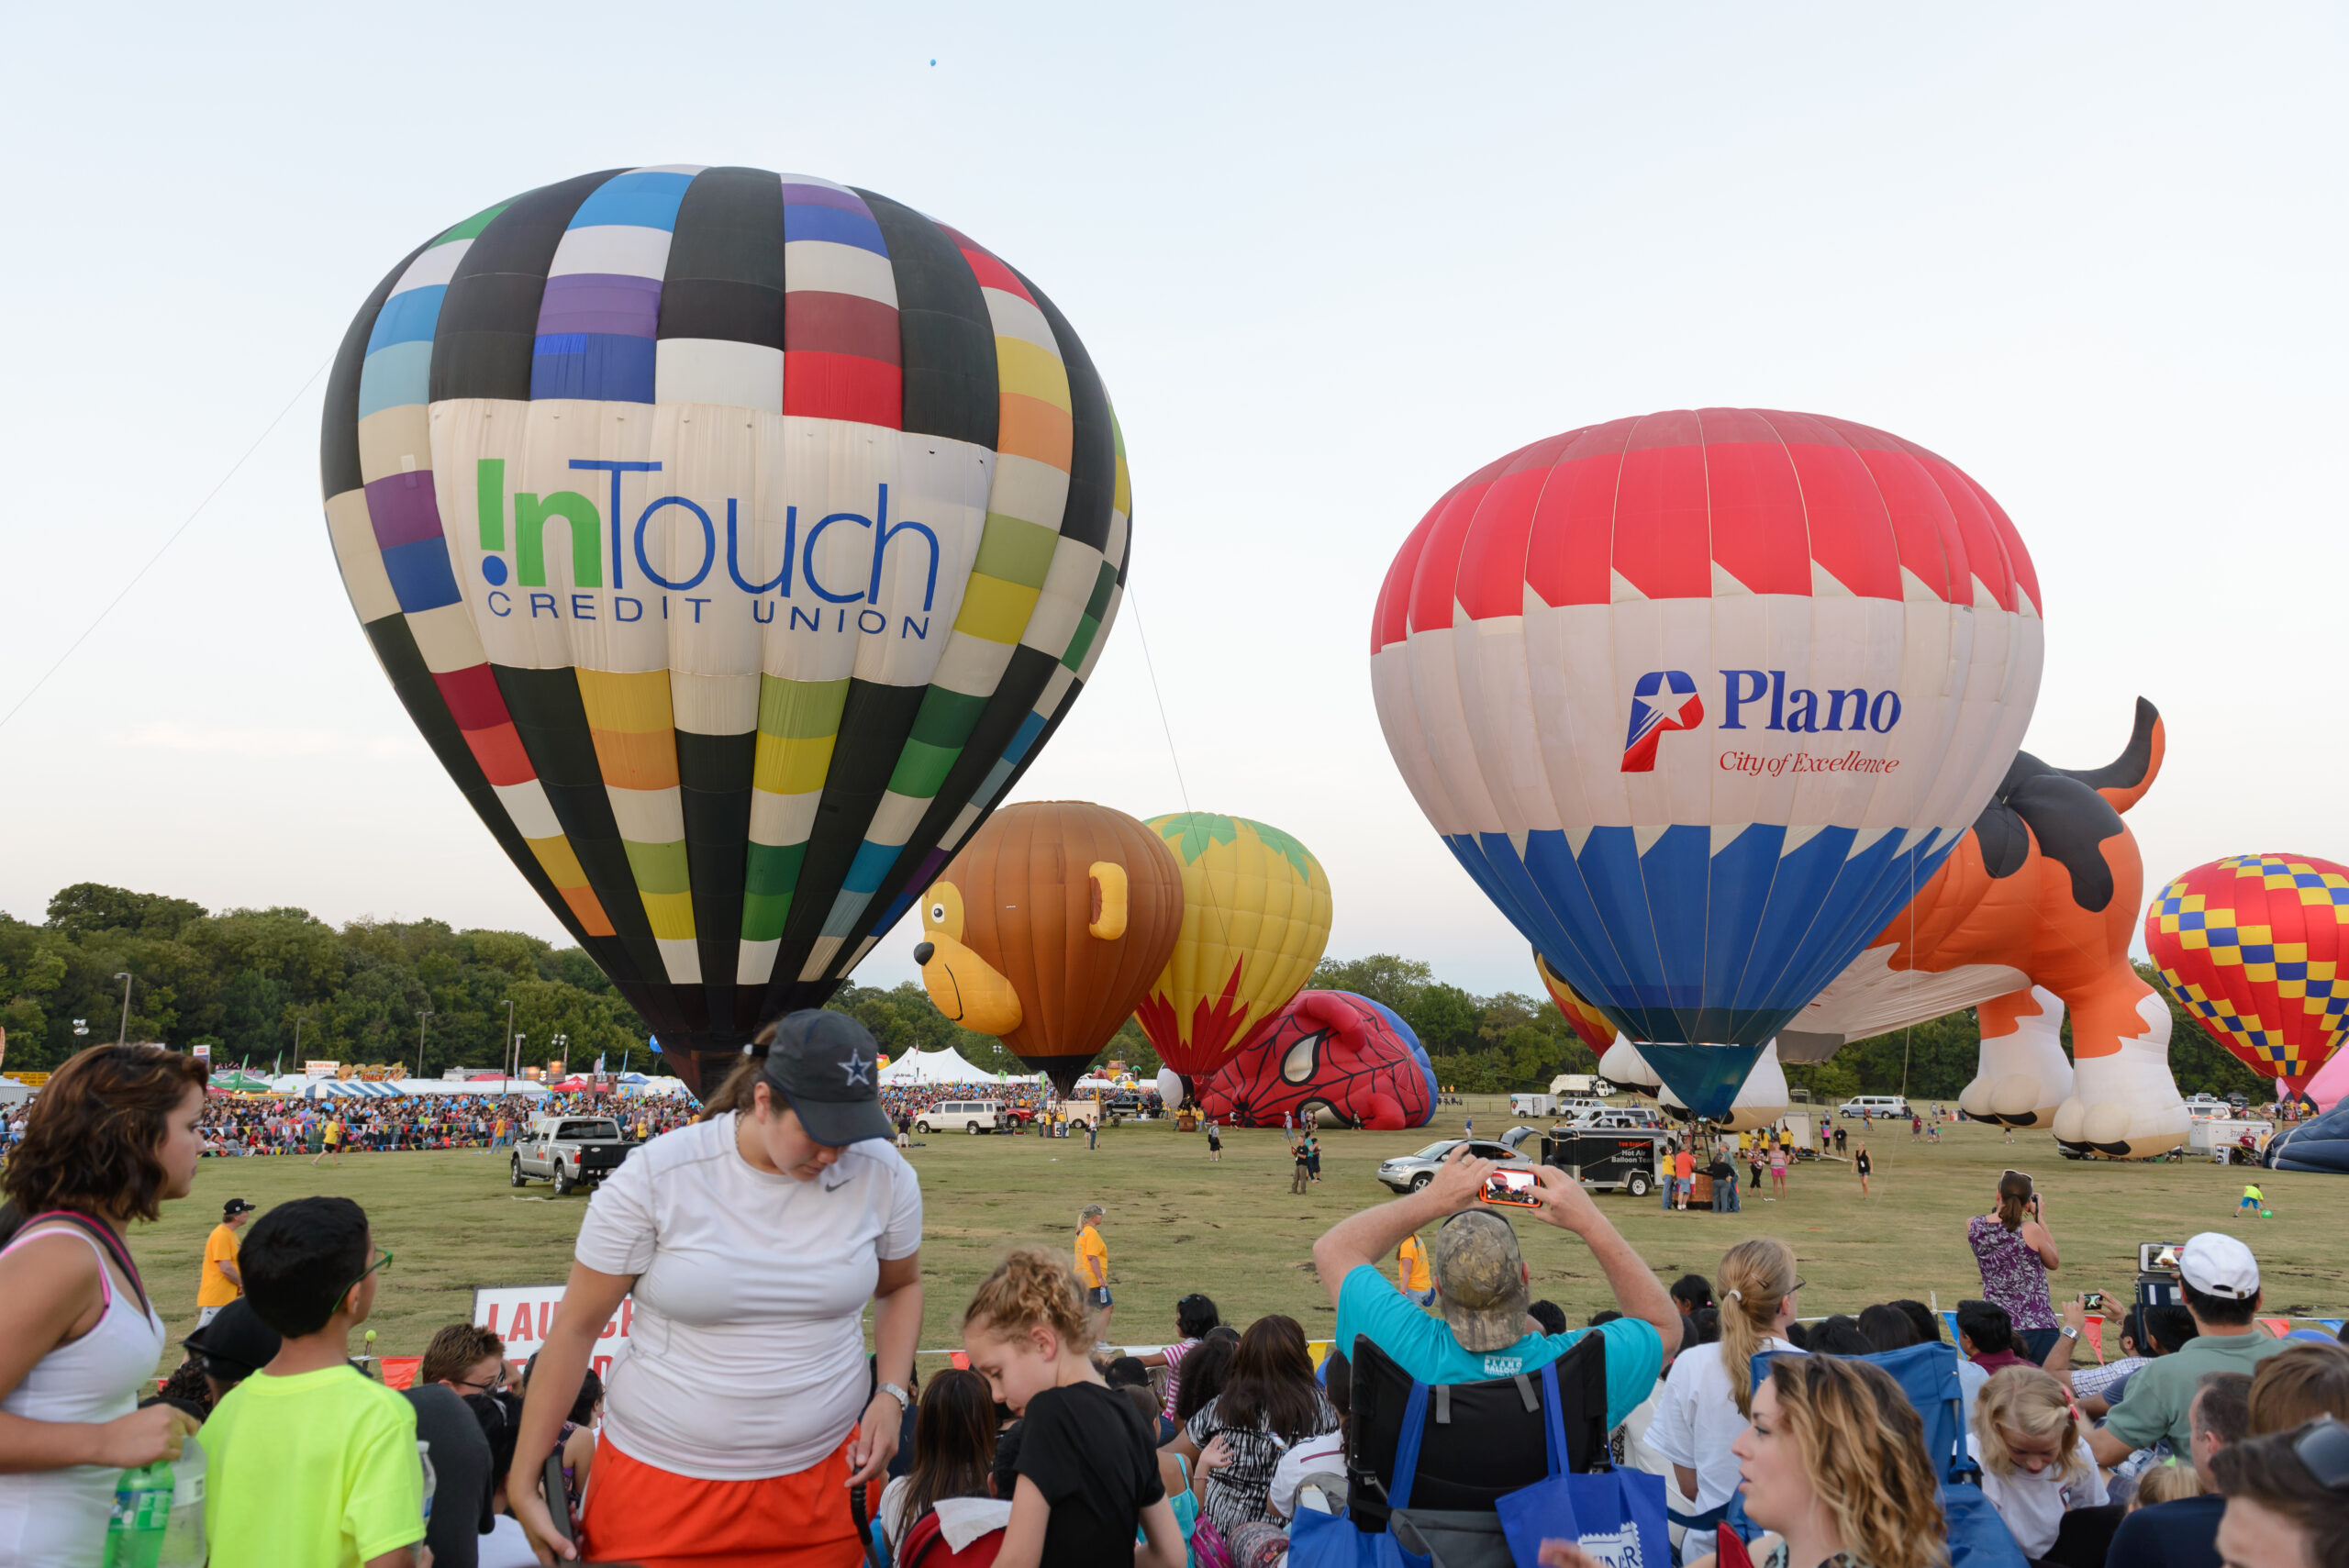 Hot air balloons, including some shaped like animals, inflate at a crowded festival with onlookers during sunset